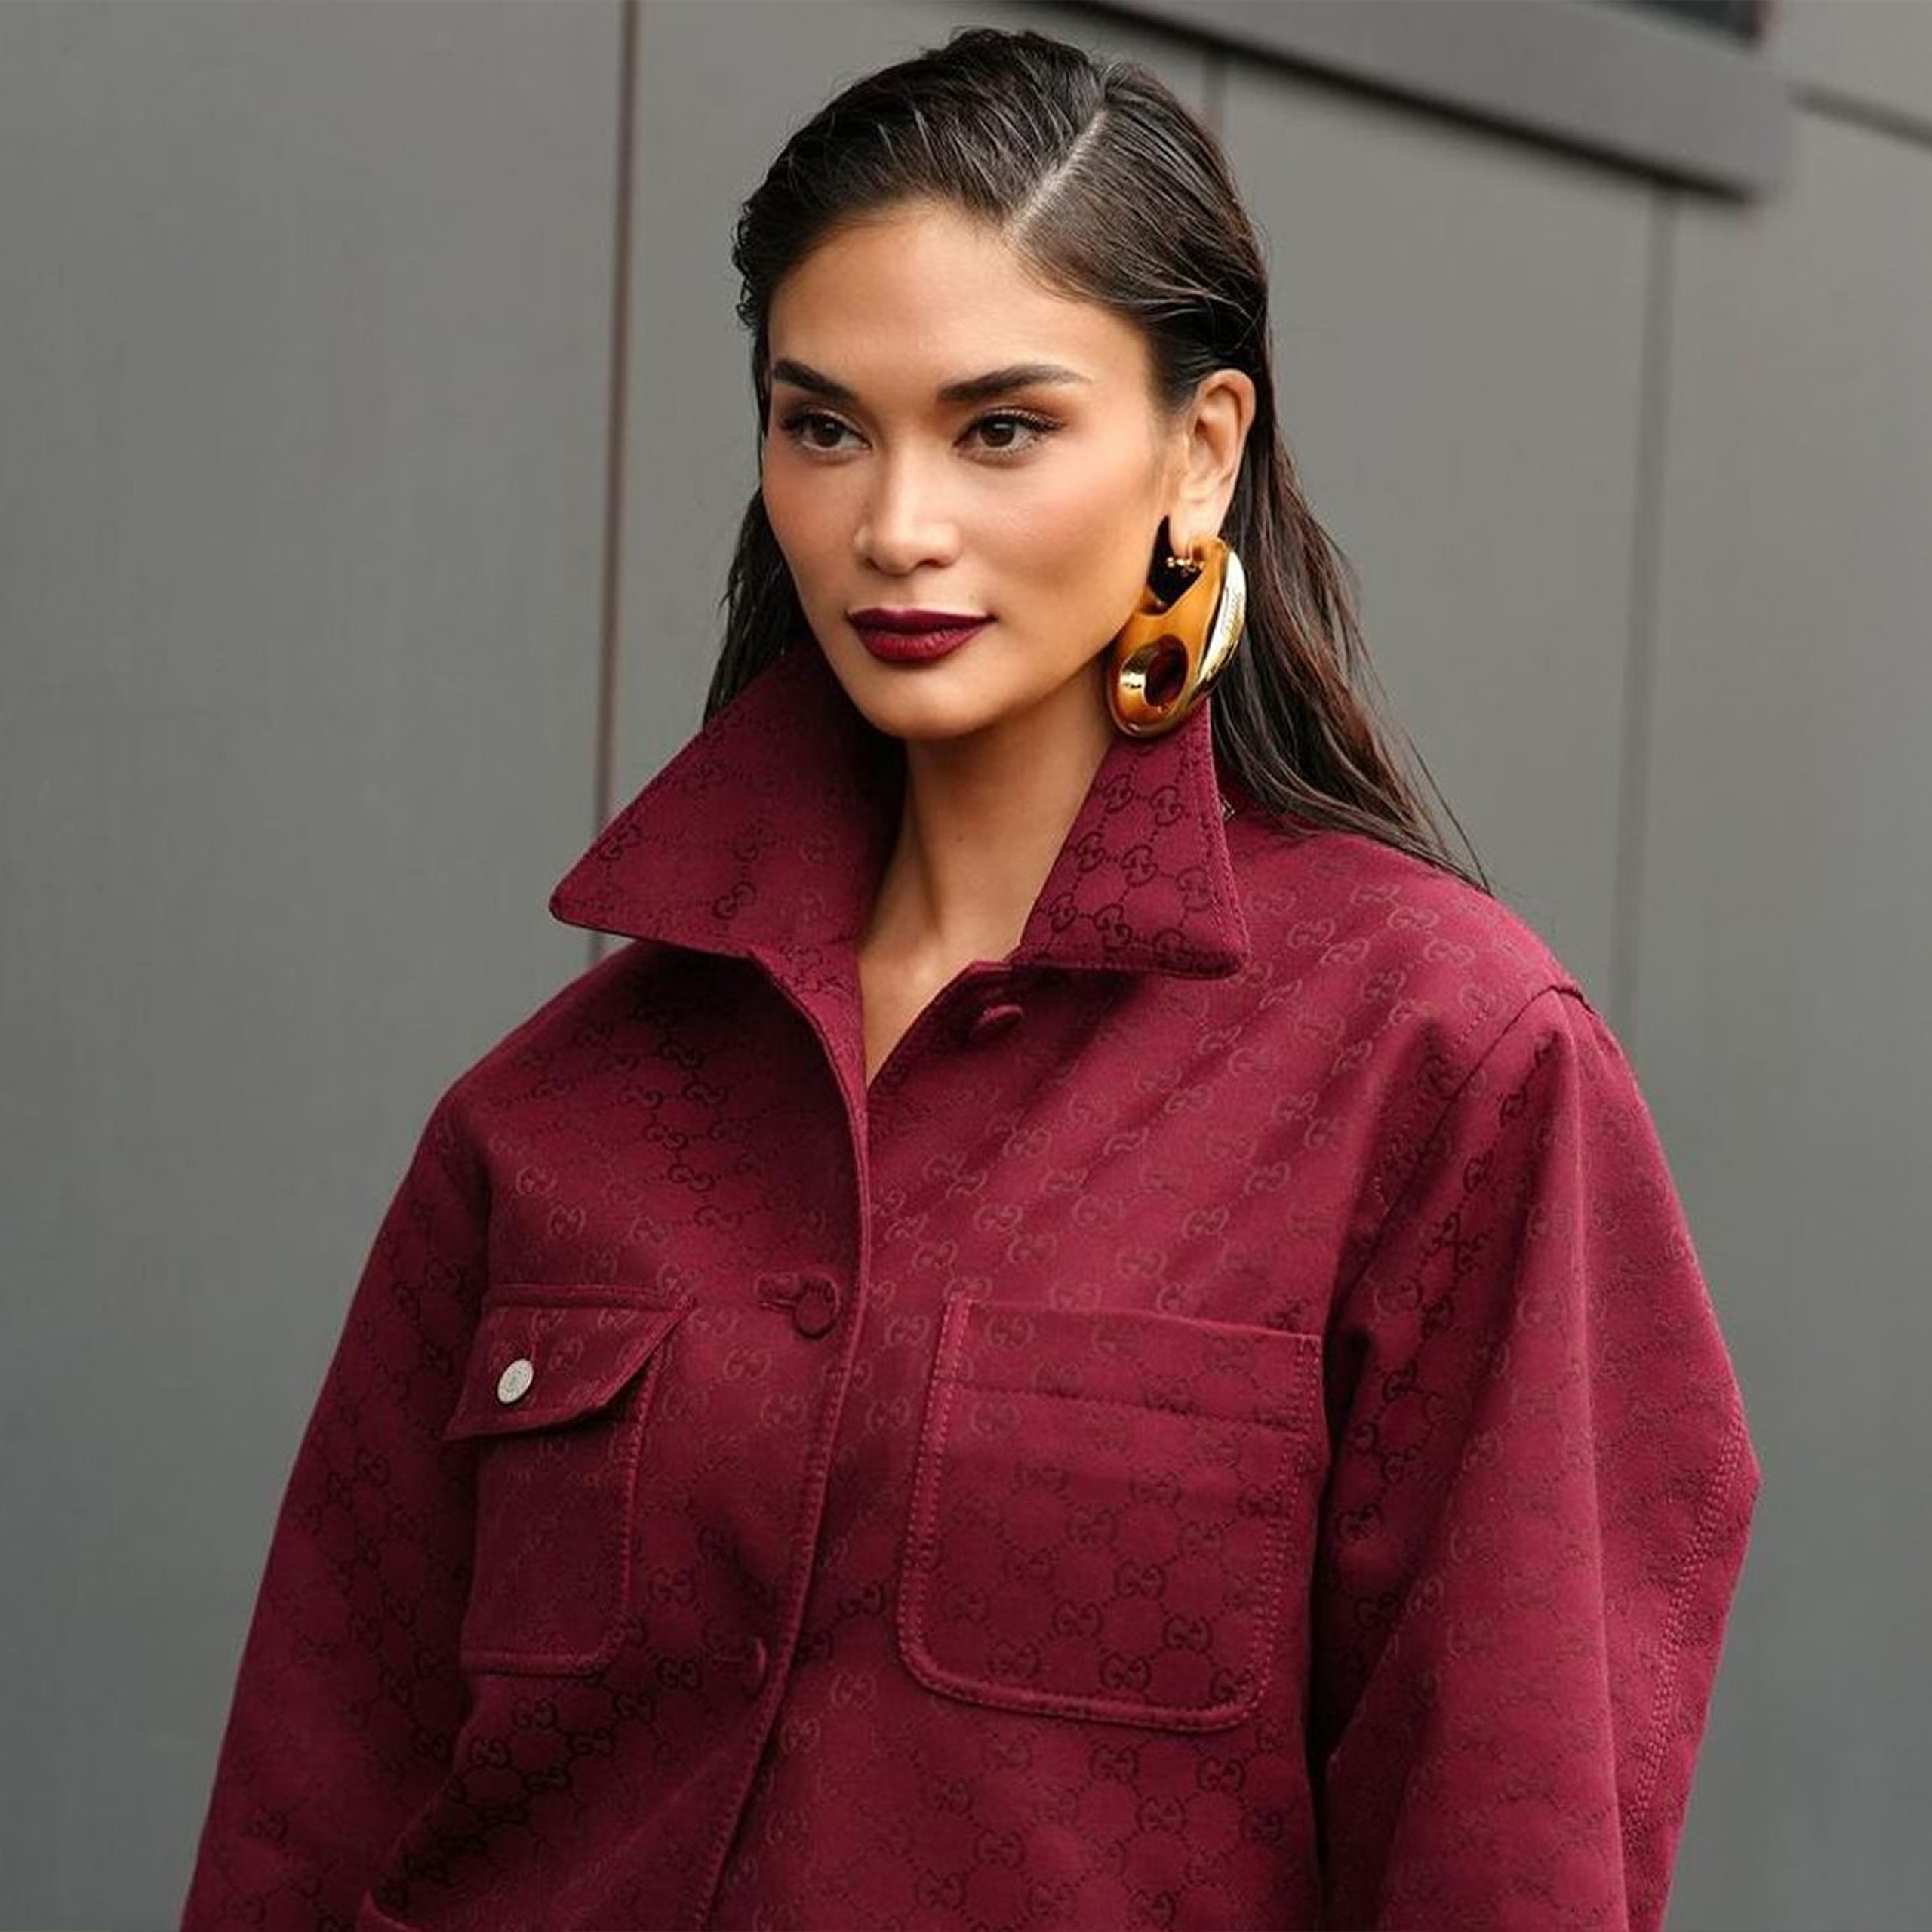 Global Power: Pia Wurtzbach Ranks as One of the Highest in Media Value During Fashion Week